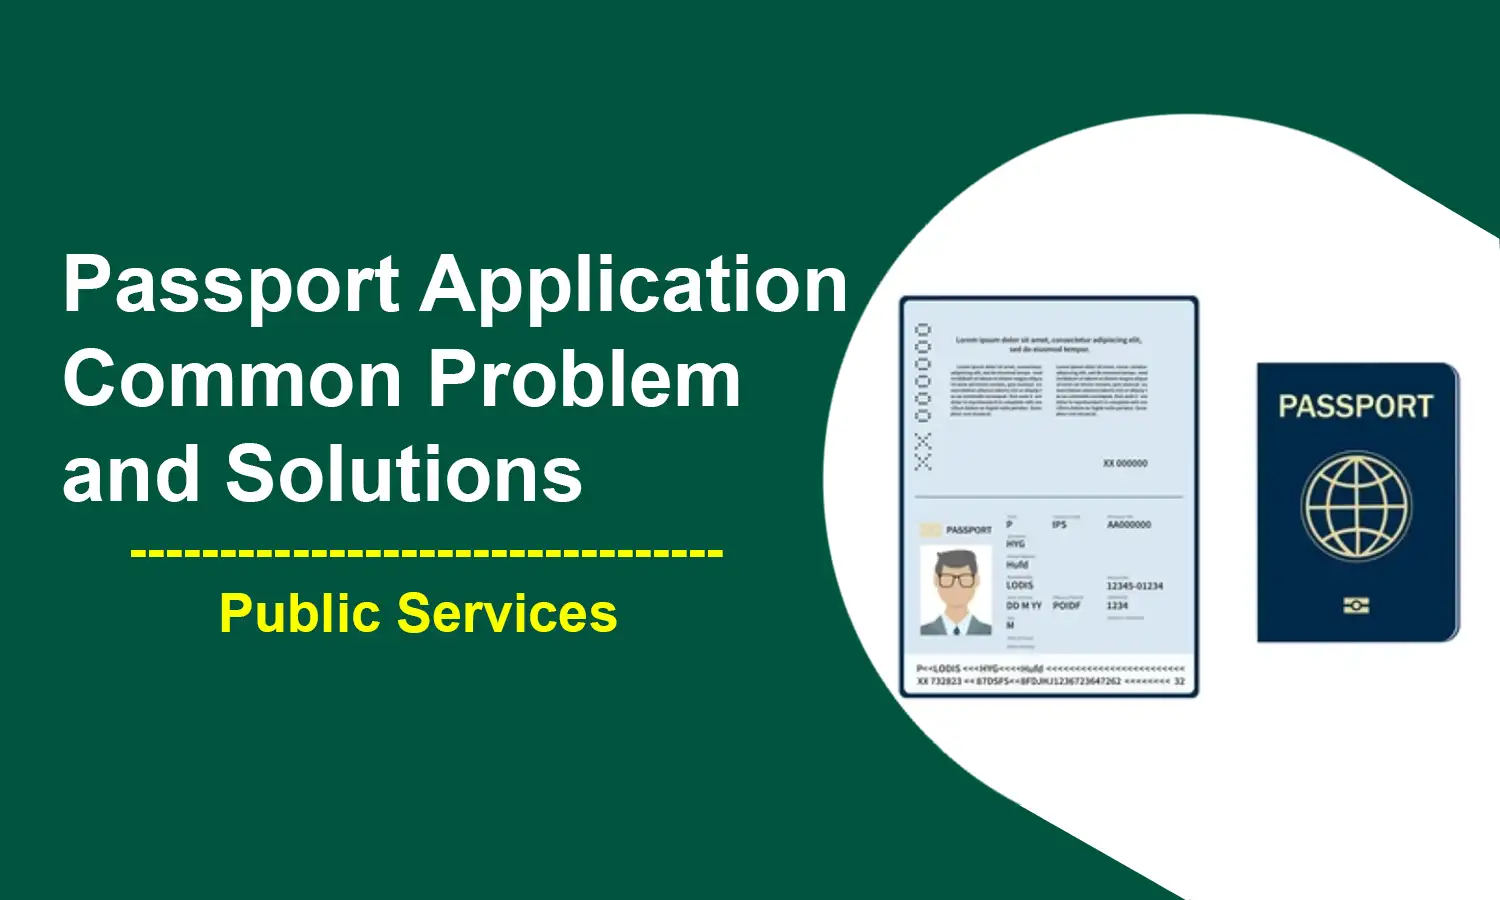 Passport Application Common Problem and Solutions